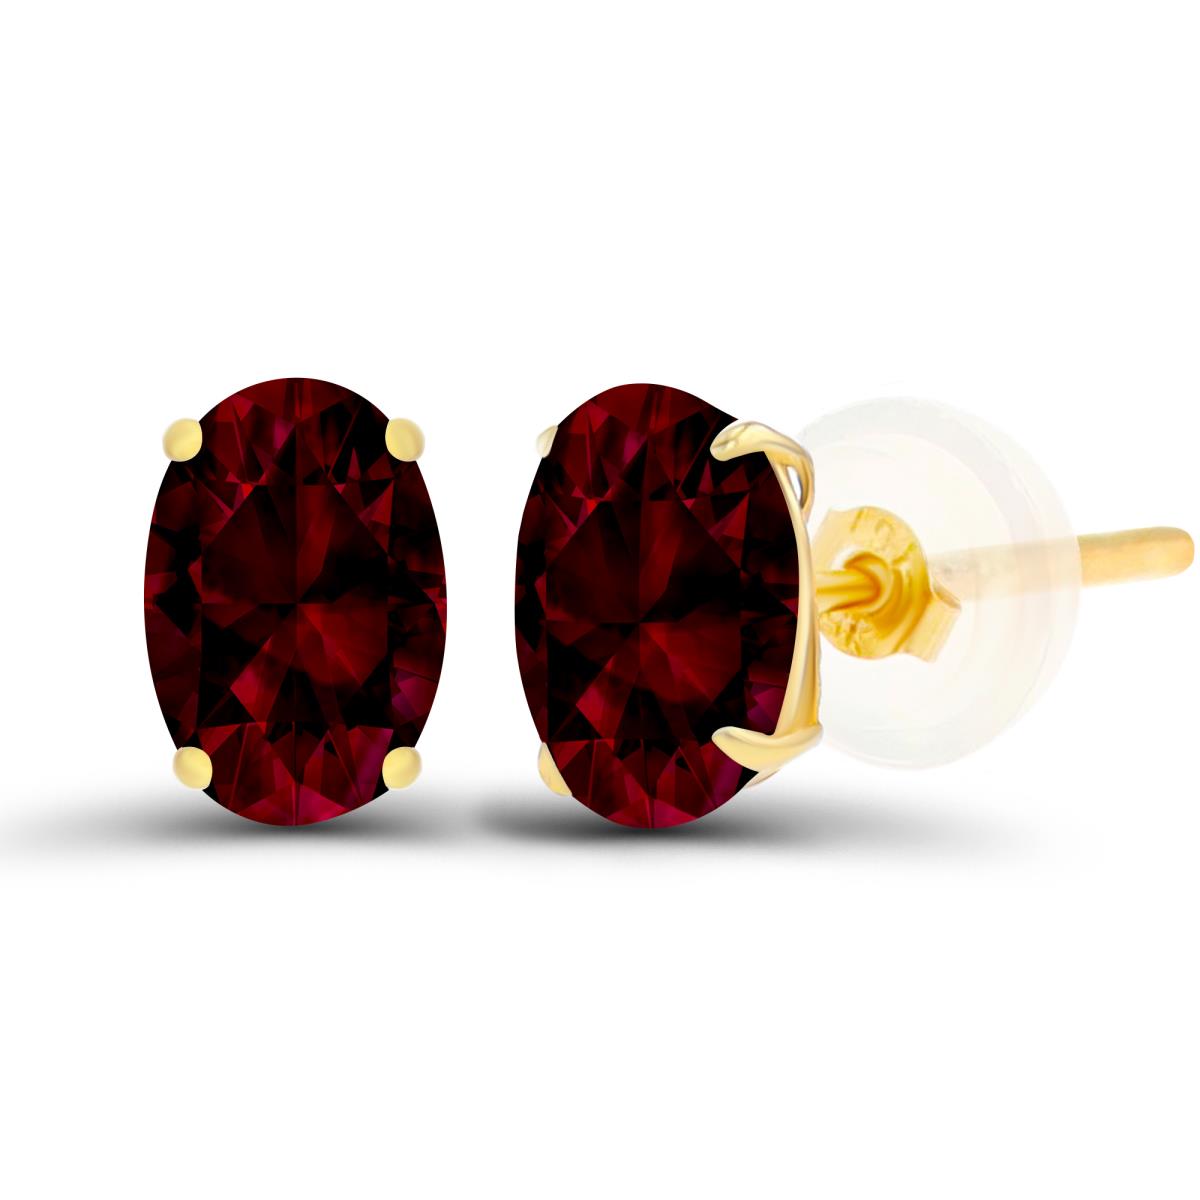 Sterling Silver Yellow 6x4mm Oval Garnet Basket Stud Earrings with Silicone Back